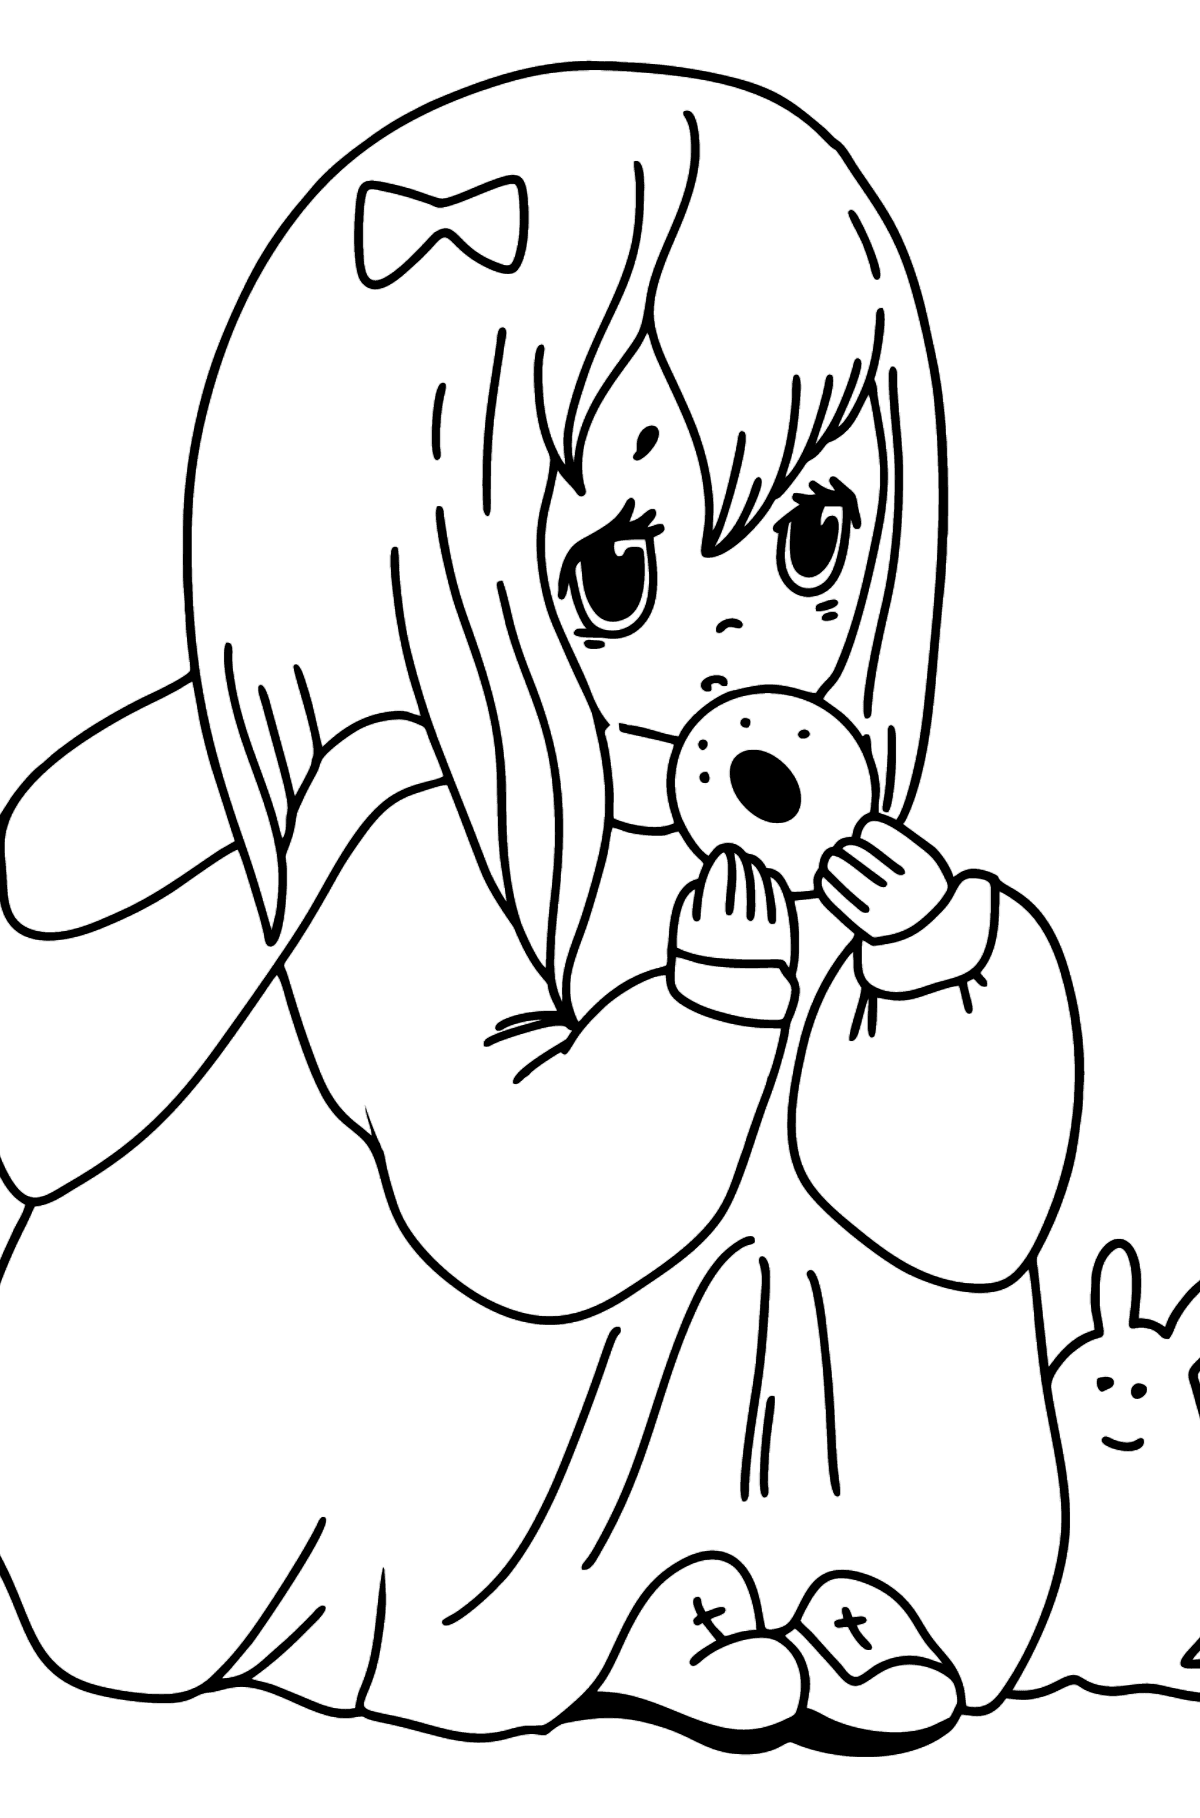 Anime Girl with Donut coloring page - Coloring Pages for Kids